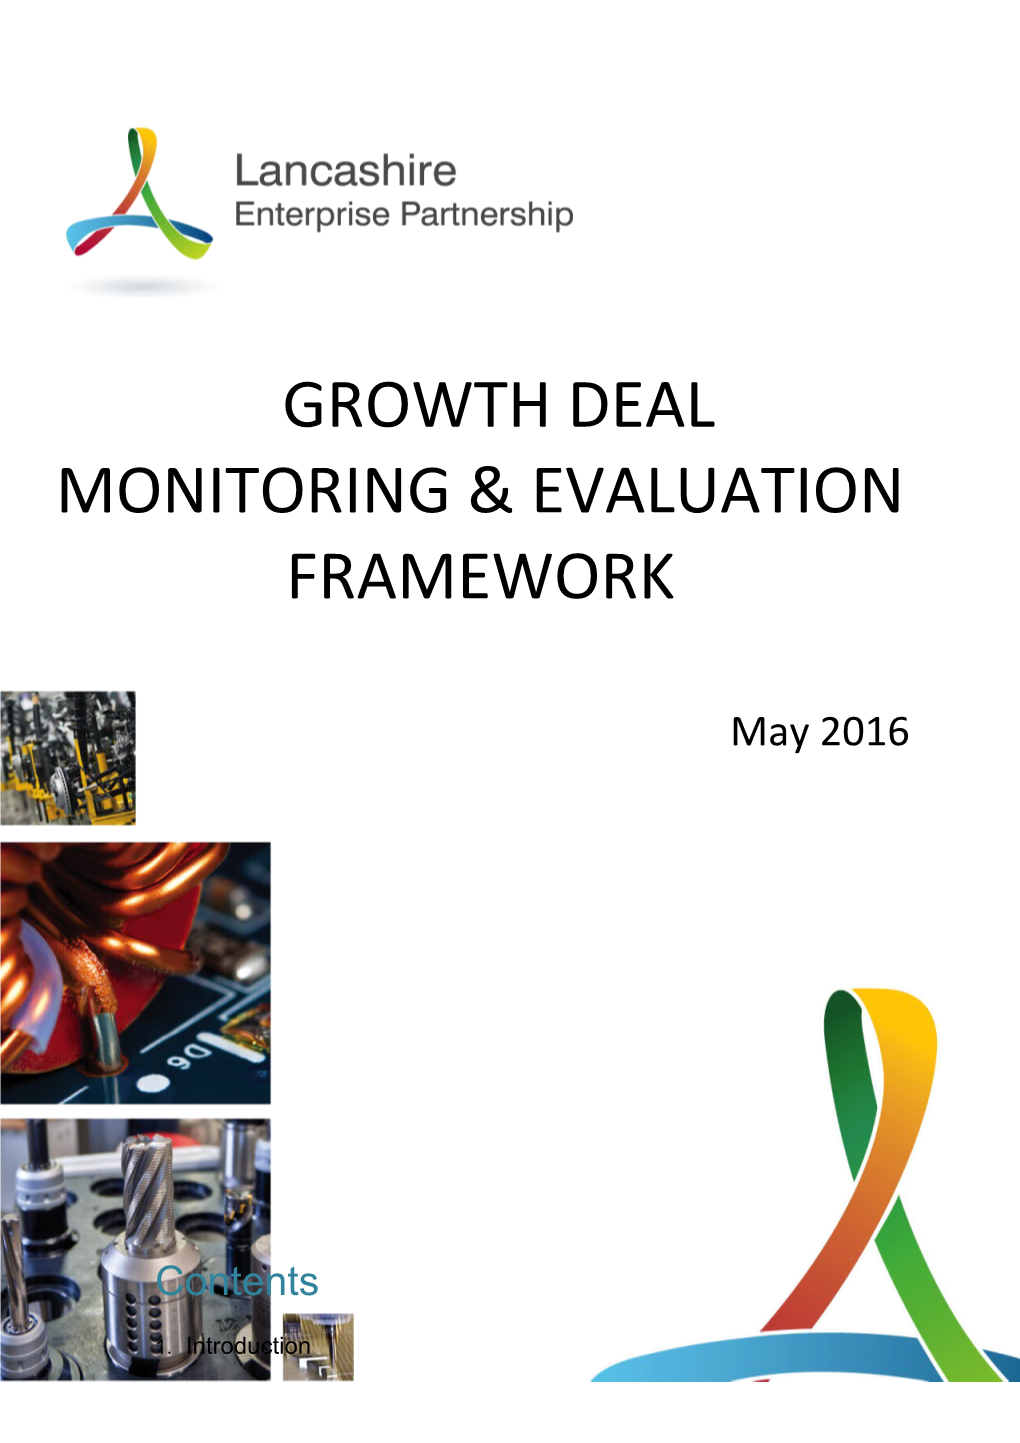 Growth Deal Monitoring & Evaluation Framework